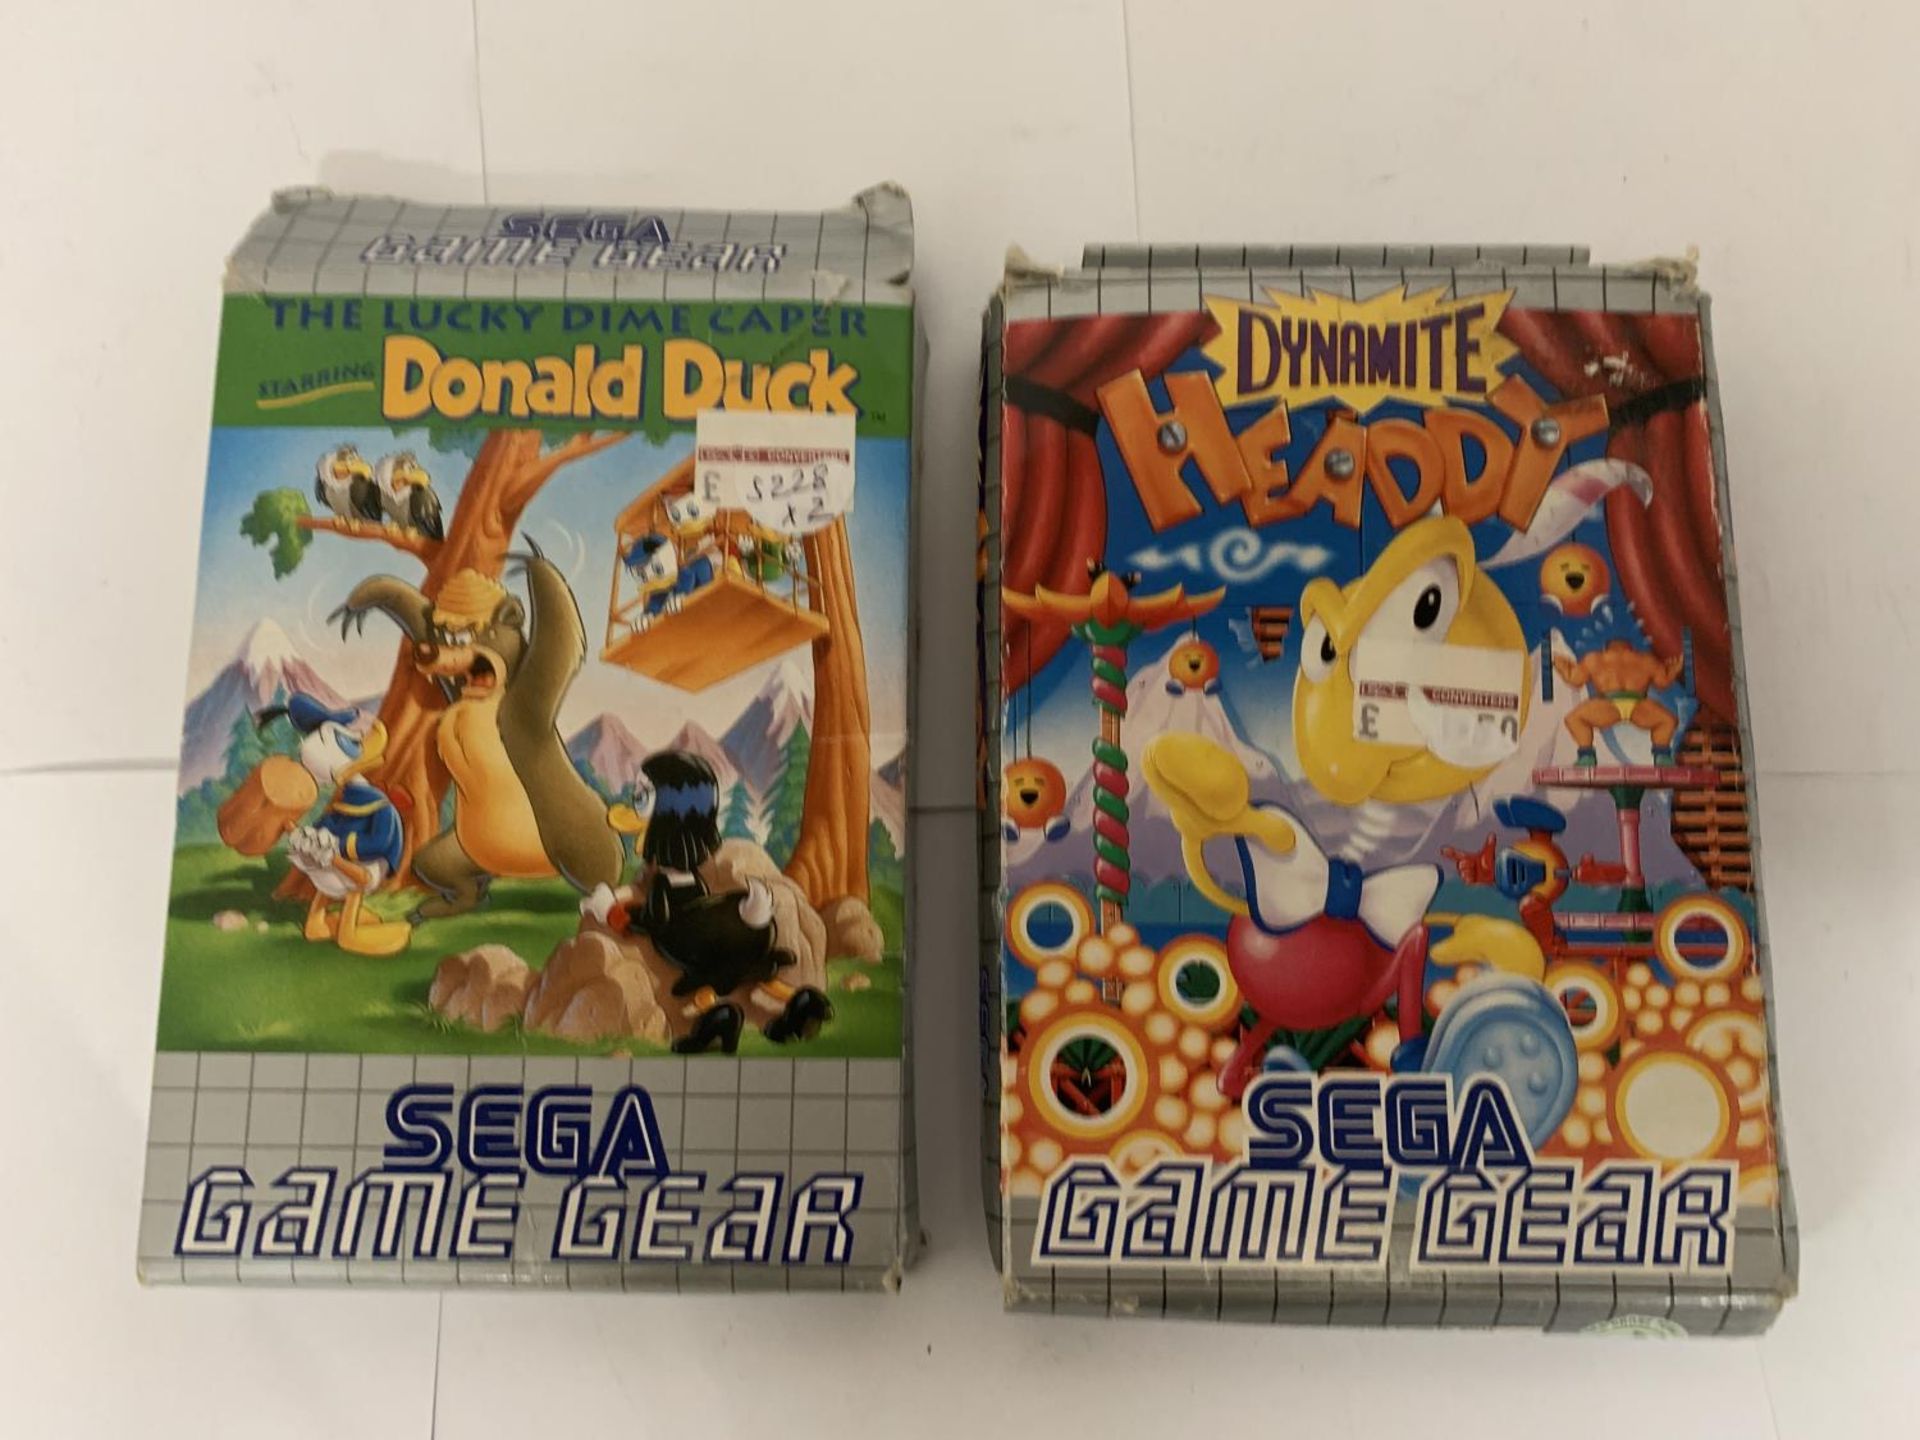 TWO BOXED SEGA GAME GEAR GAMES TO INCLUDE THE LUCKY DIME CAPER STARRING DONALD DUCK AND DYNAMITE